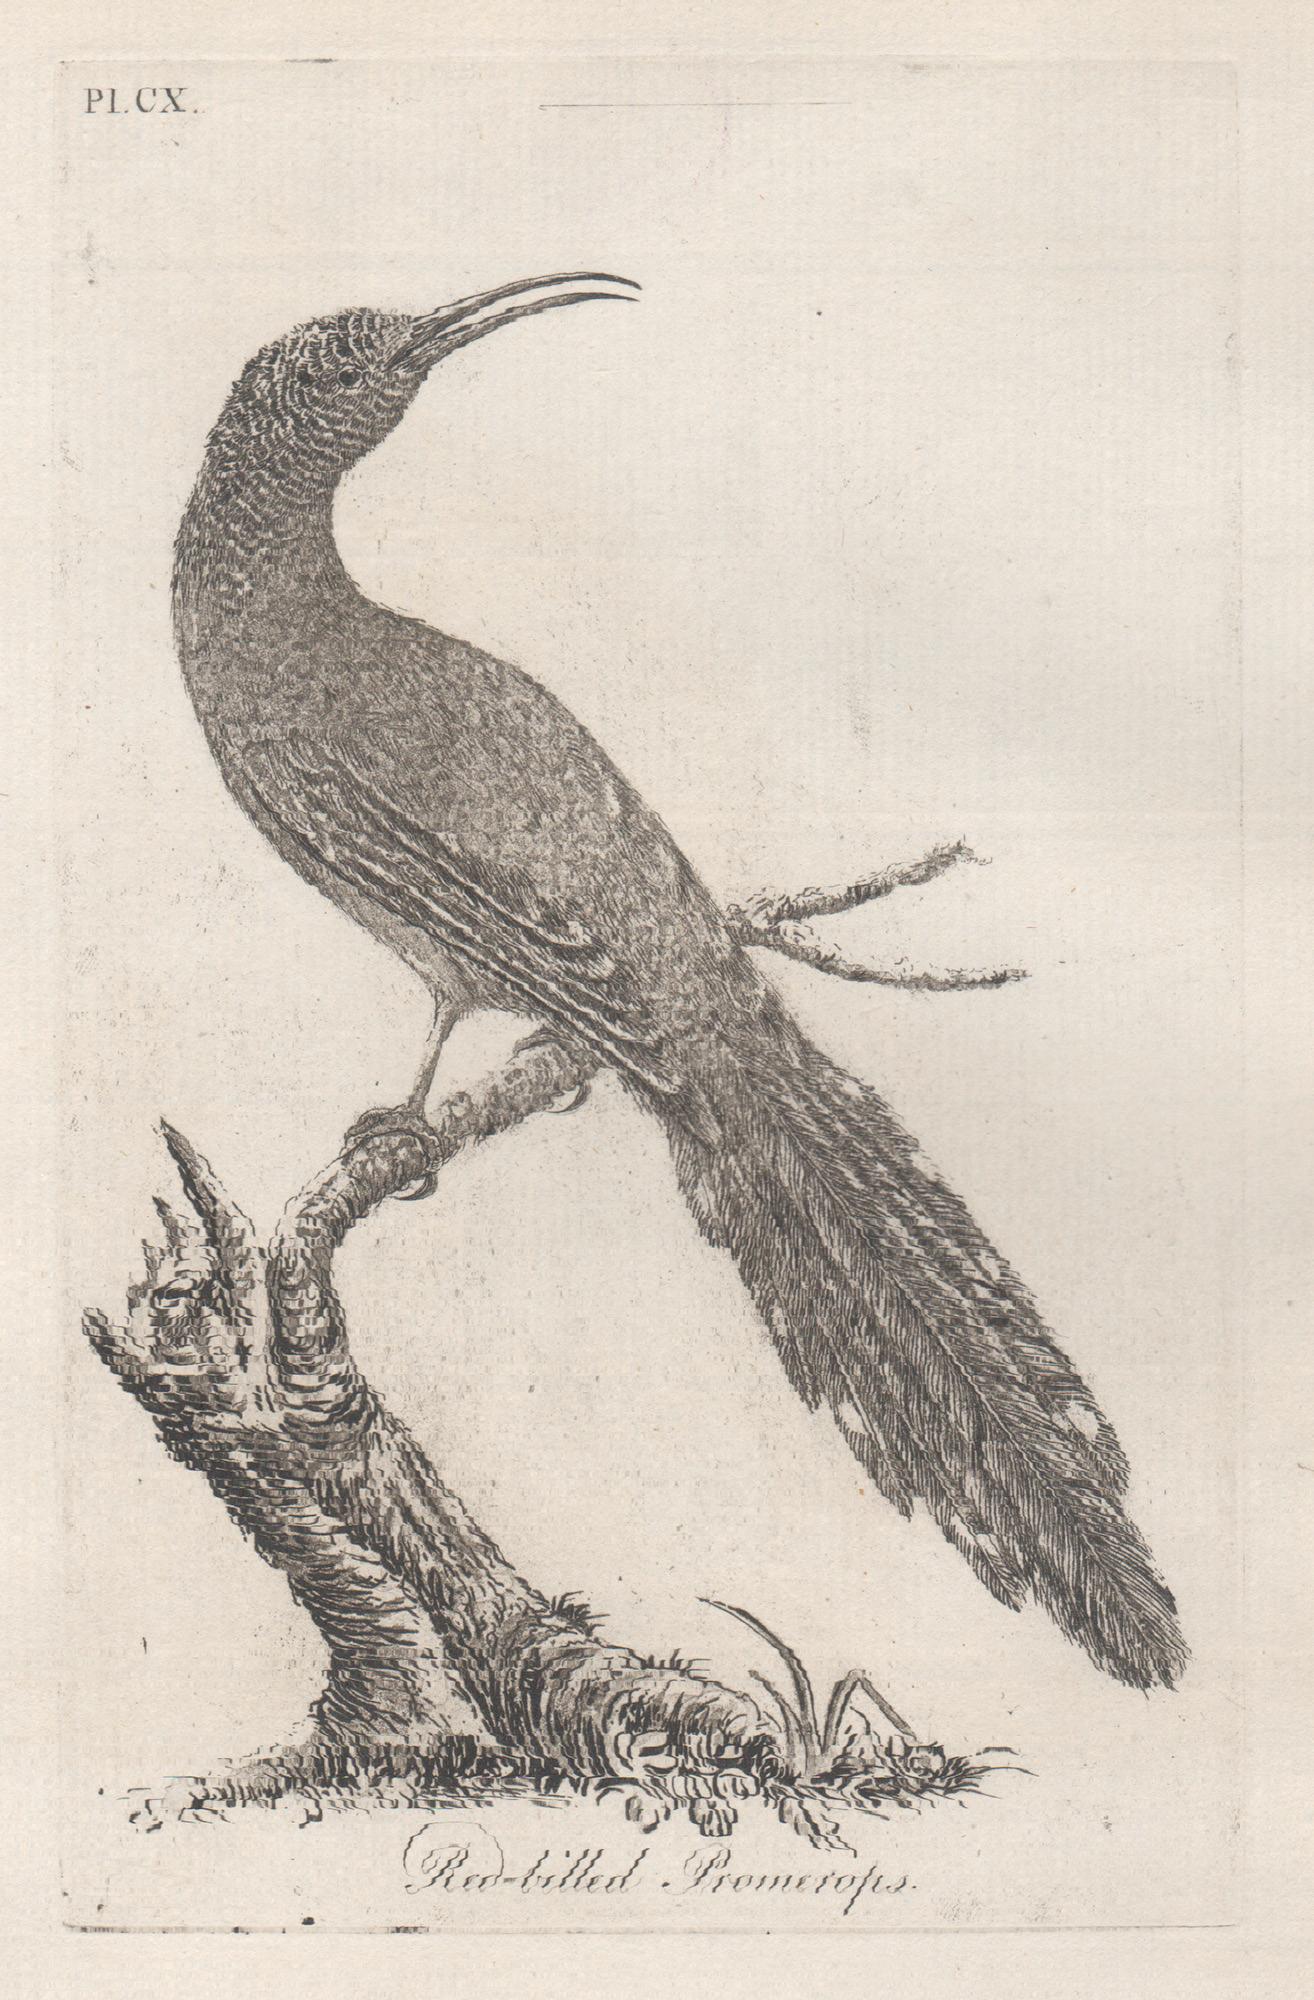 Copper-line engraving. 1781. From John Latham's 'General Synopsis of Birds' 1781-1785, and its Supplements. Plate number top left. Laid paper.

John Latham was the leading English ornithologist of his day.

190mm by 120mm (platemark) 
240mm by 180mm